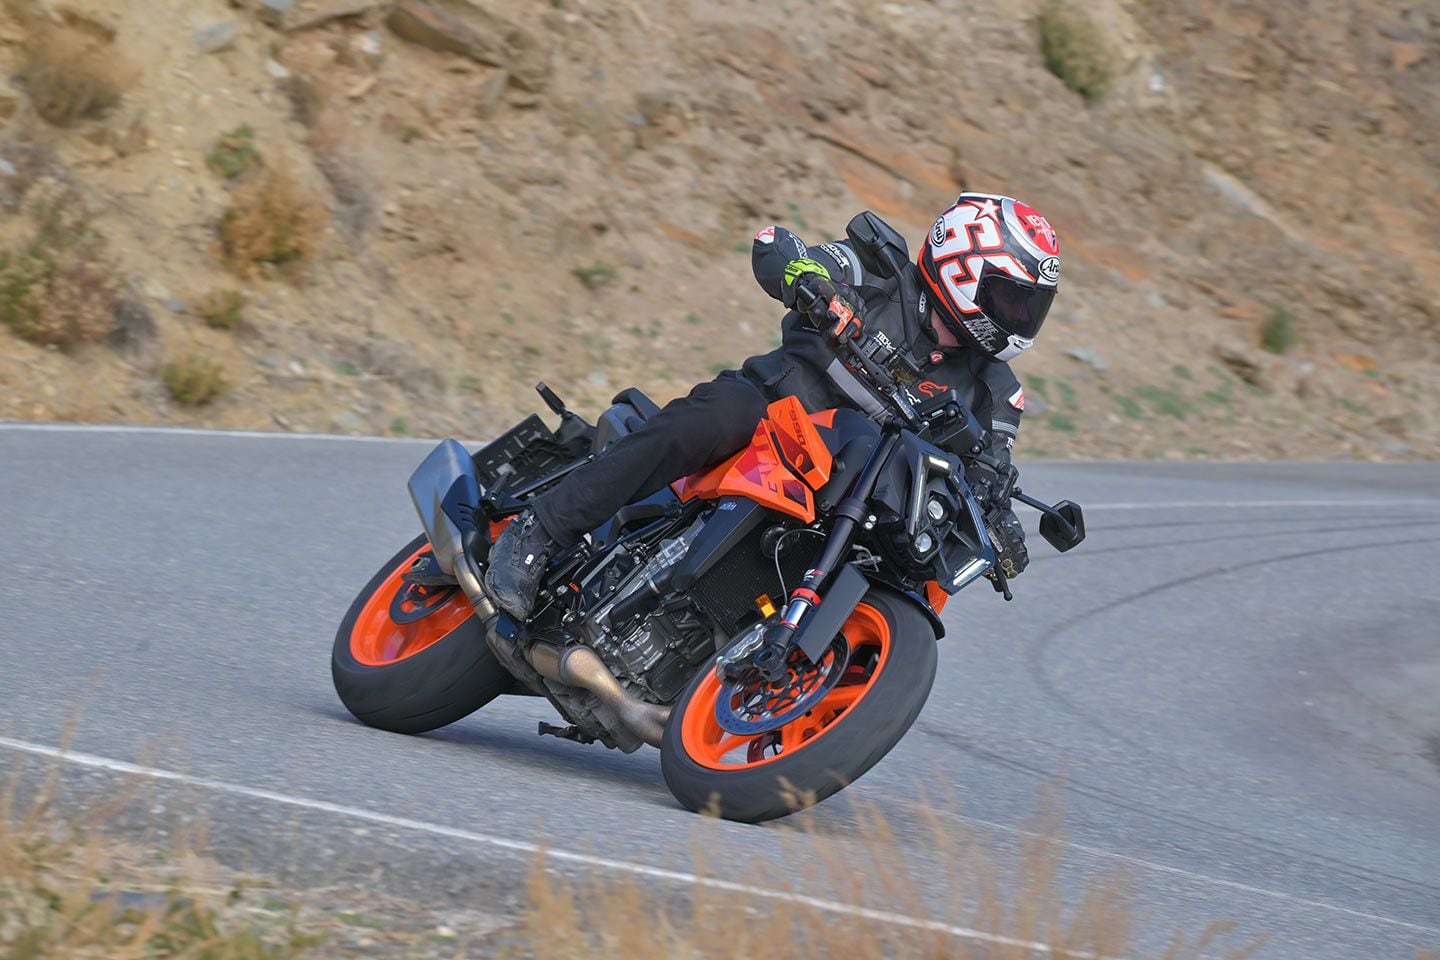 KTM doesn’t hide its intentions with the 990 Duke. Yes, there is an added level of stability and an emphasis on comfort, but the bike is still developed for fast, flowing roads.